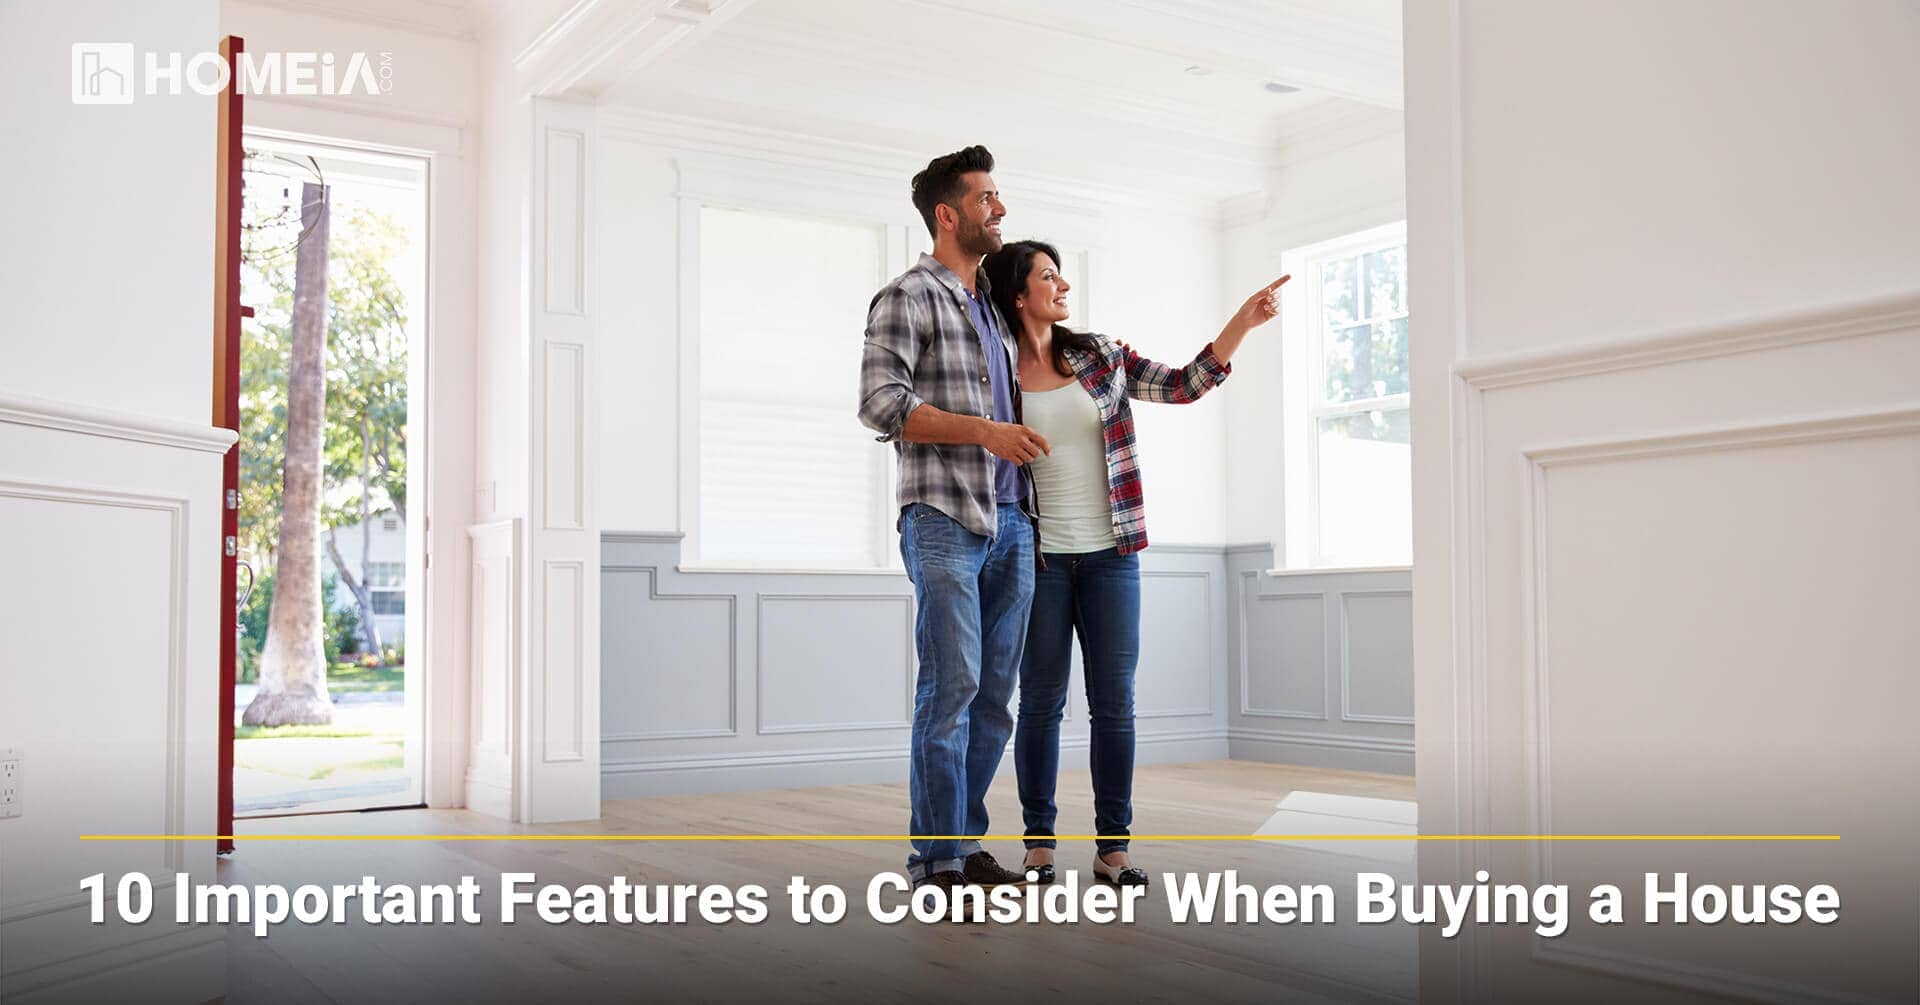 10 Important Features to Consider When Buying a House